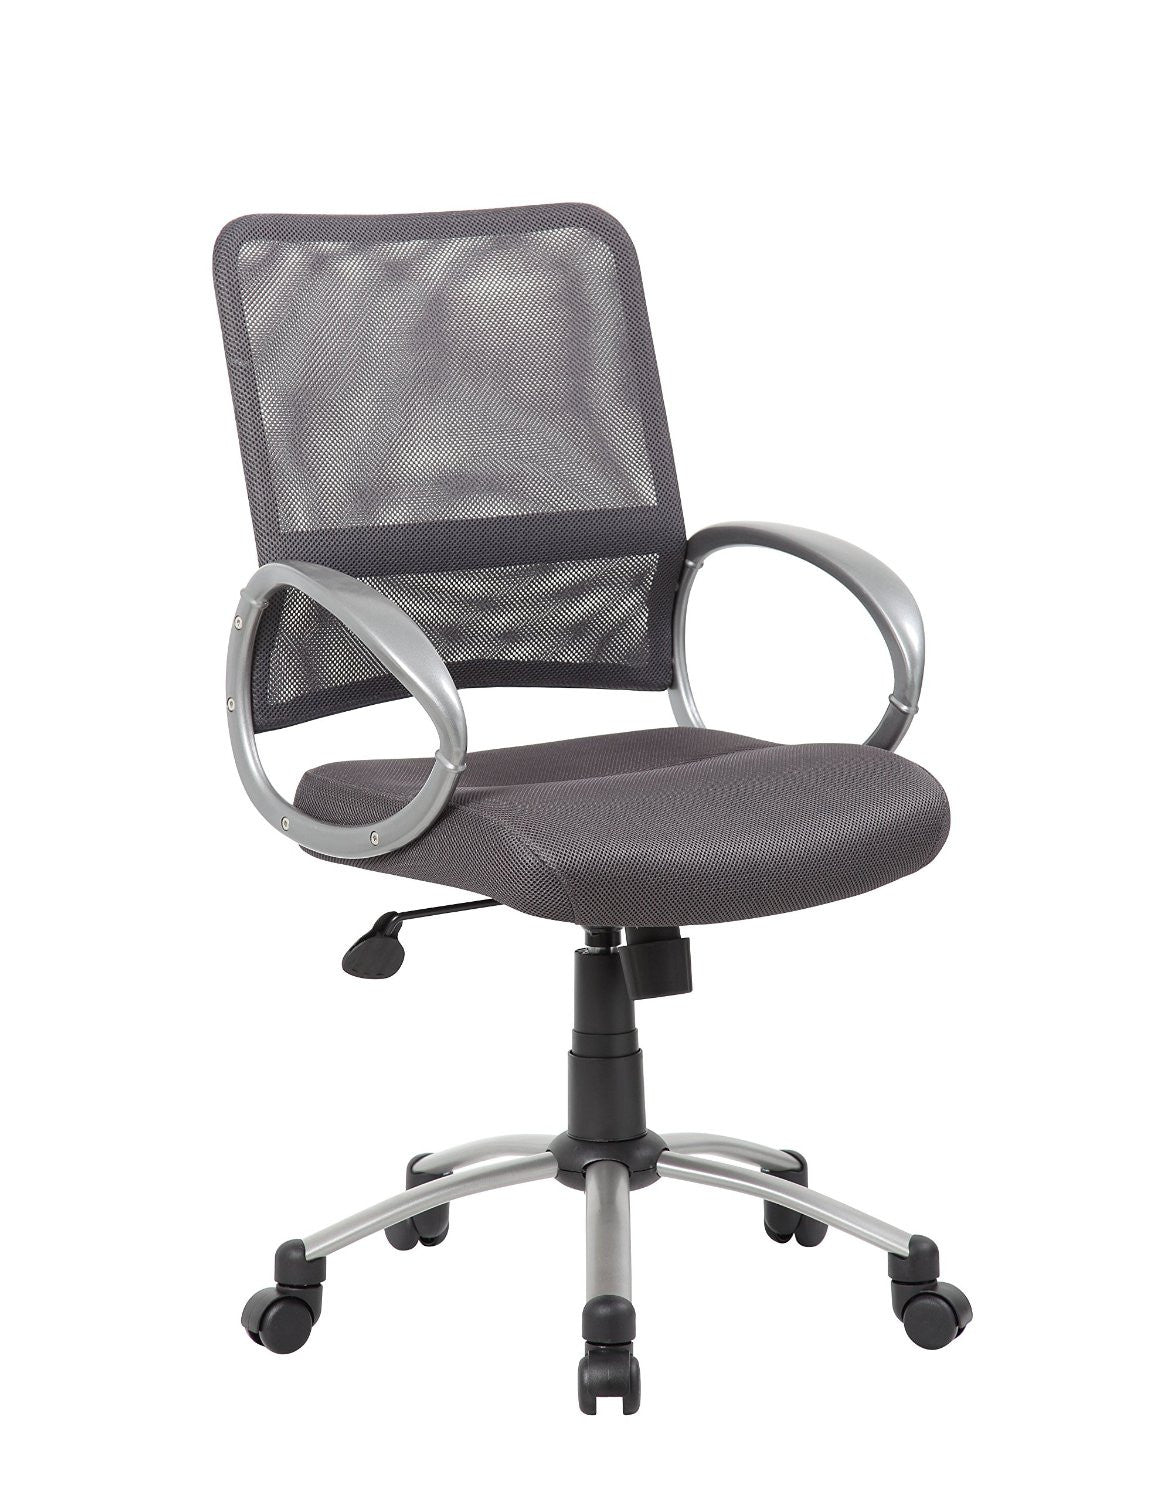 Boss Office Products B6416-cg Boss Mesh Back W/ Pewter Finish Task Chair